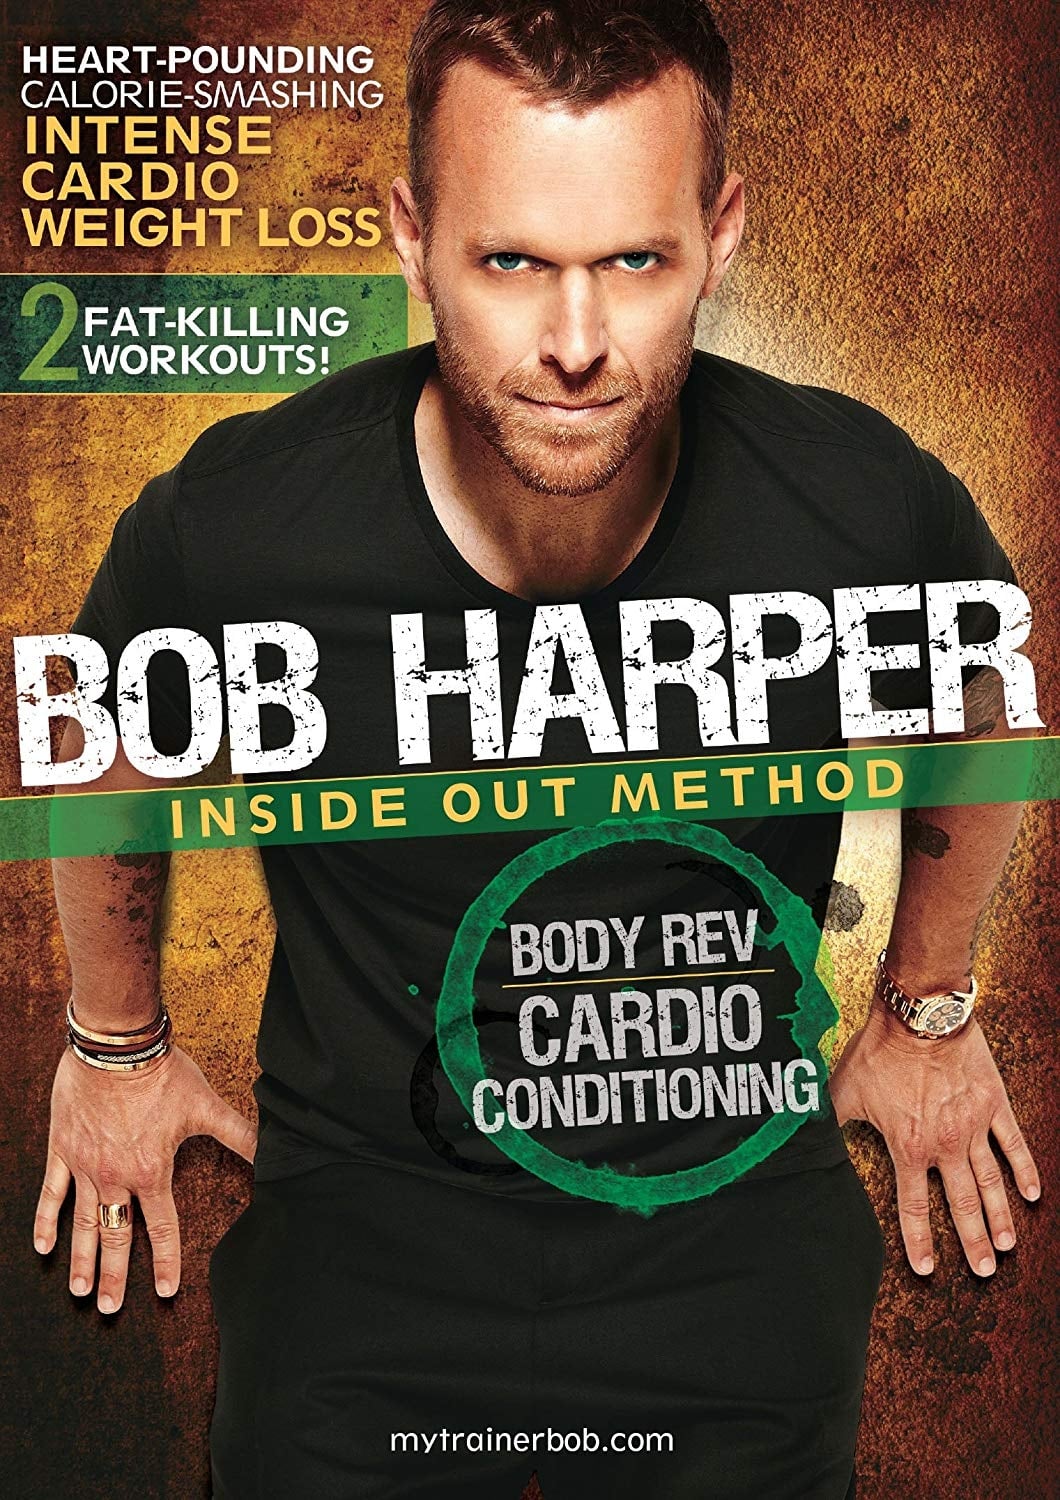 Bob Harper: Inside Out Method - Body Rev Cardio Conditioning Workout 2